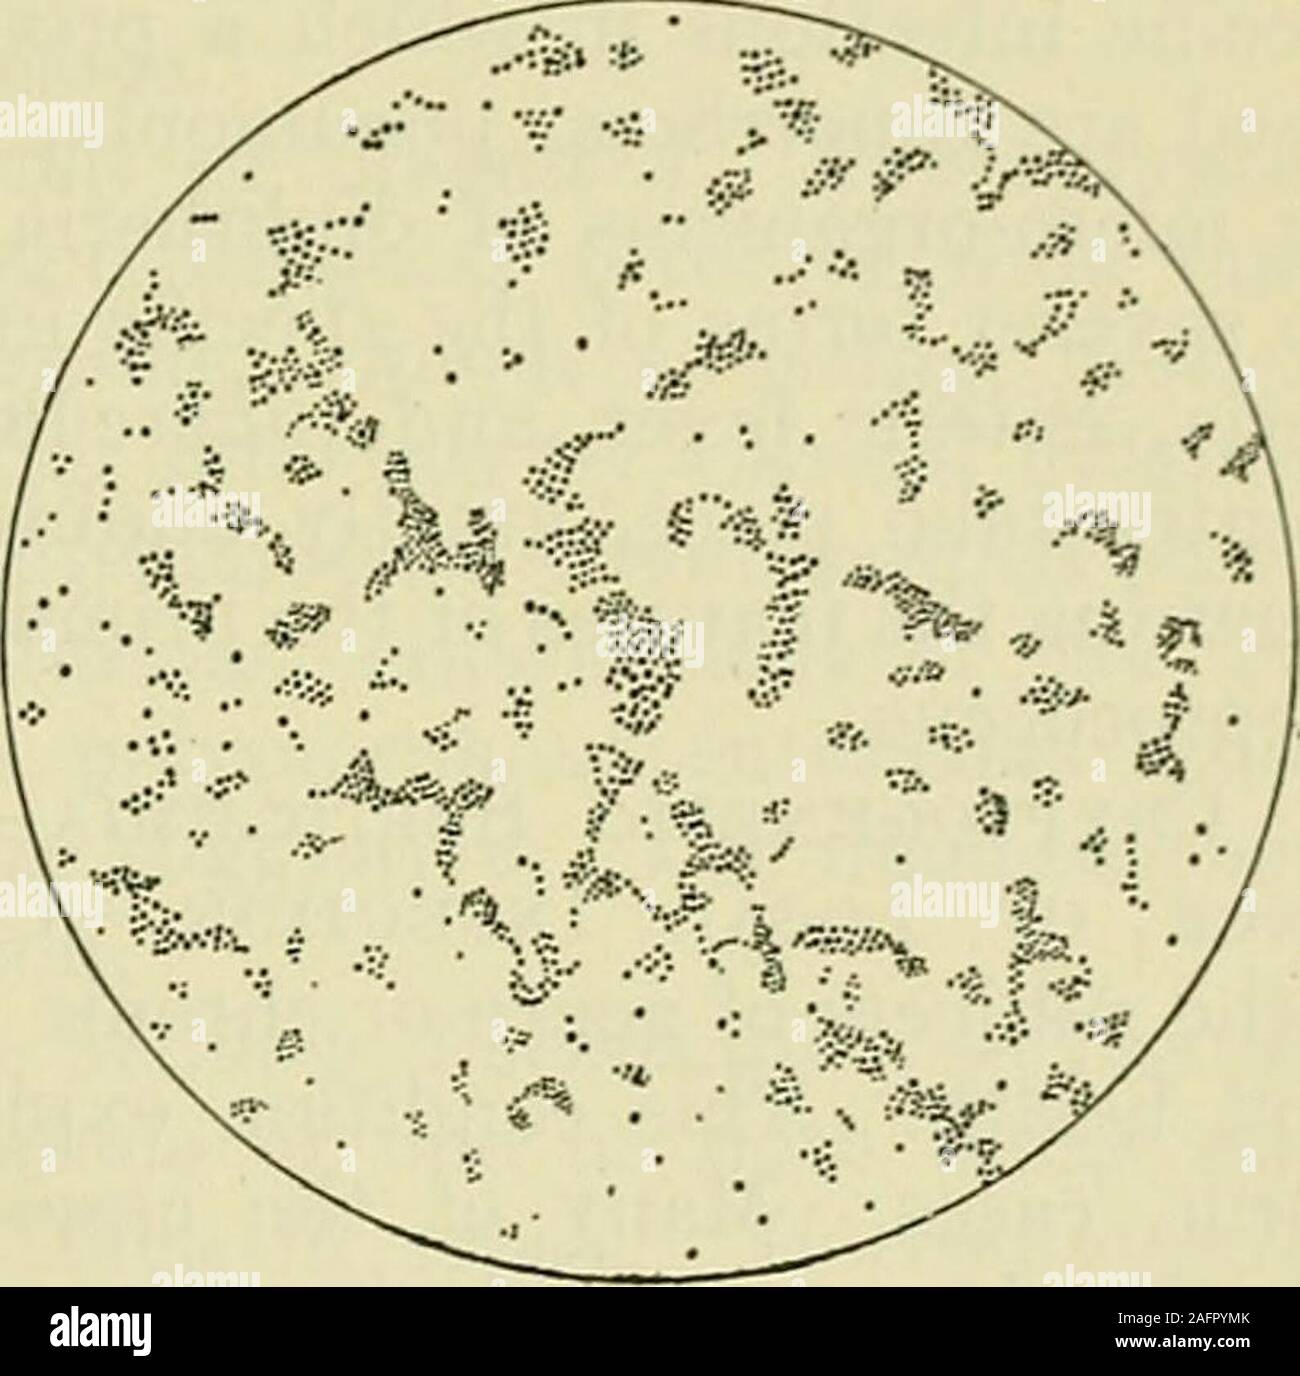 . Internal medicine; a work for the practicing physician on diagnosis and treatment, with a complete Desk index. Fig. 254.—Streptococcus pyogenes. Fig. 255.—Staphylococcus pyogenes aureus. the tegumentary structures are especially involved in septic inflammatoryprocesses, such as forms of erythema, scarlatiniform eruptions, malignanterysipelas, and acute septic phlegmon. Subcutaneous hemorrhages are com-mon. Finally, we recognize a great group of cases in which inflammatoryand suppurative disease of the various viscera, as for example, the lungs,kidney, liver, stomach, and intestines or spleen Stock Photo